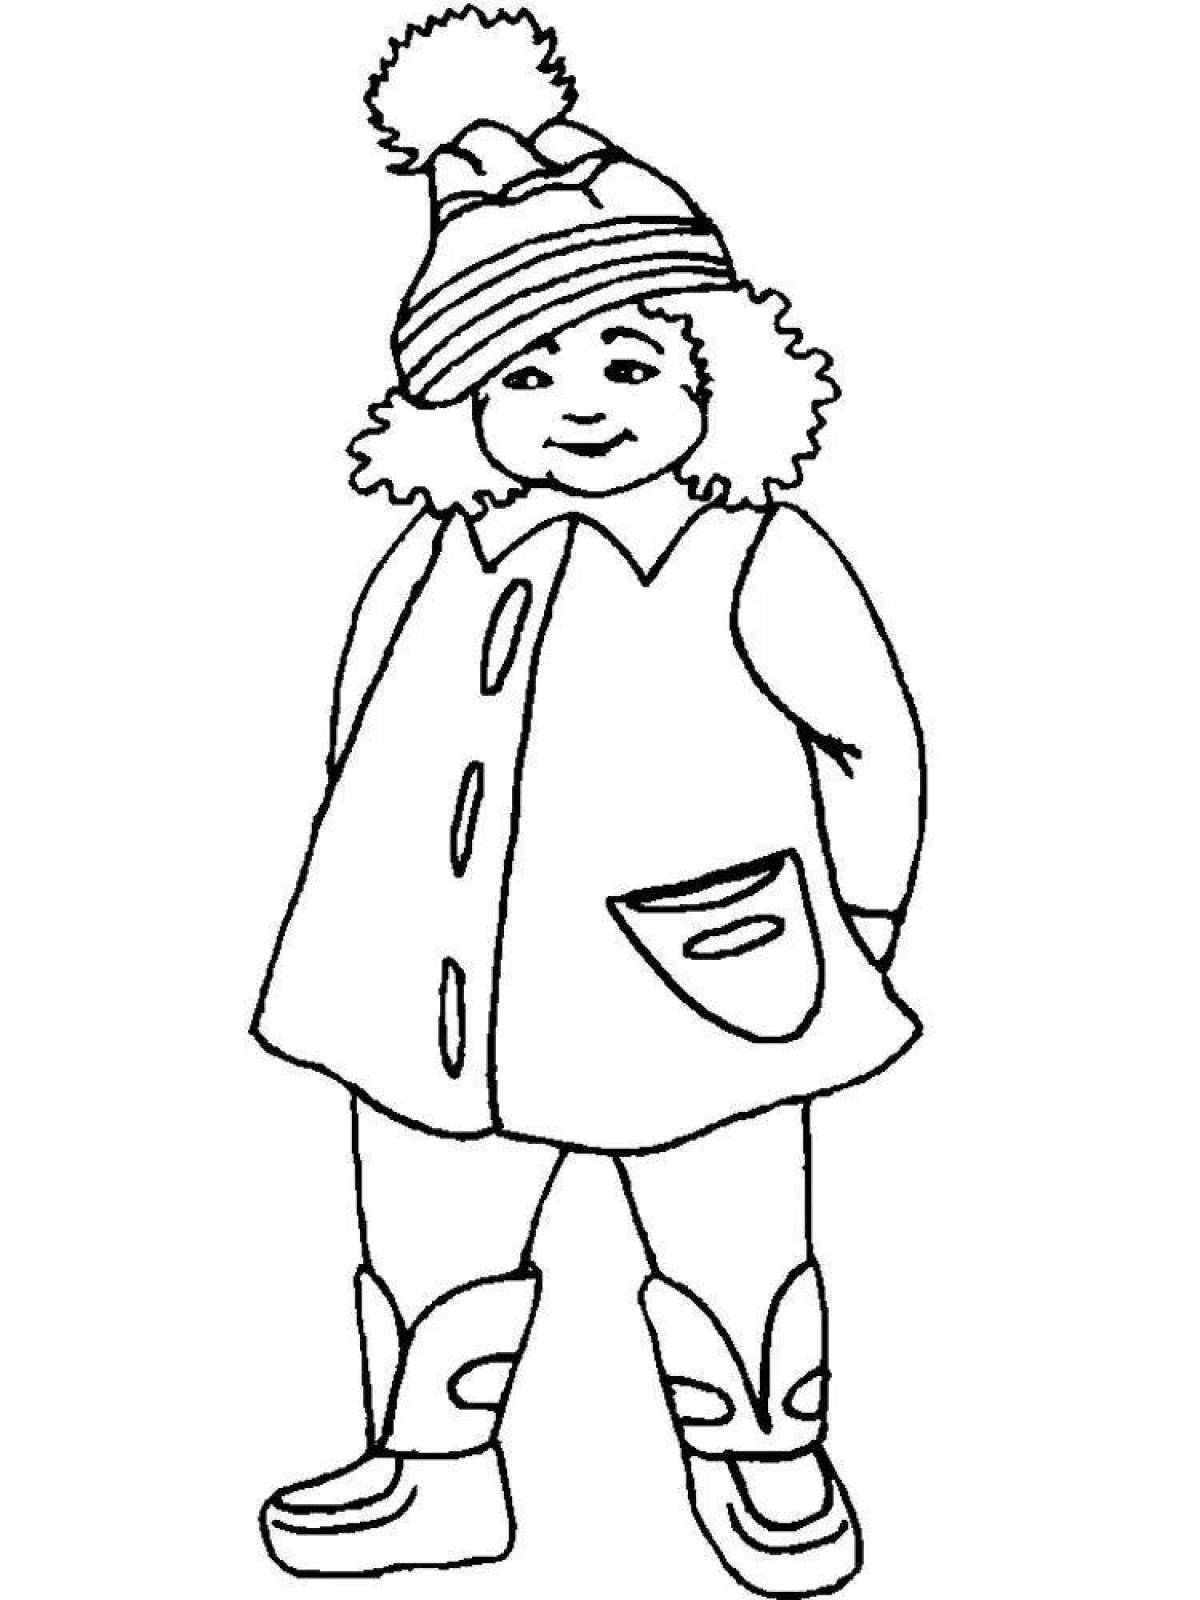 Large coloring book for children boy in winter clothes